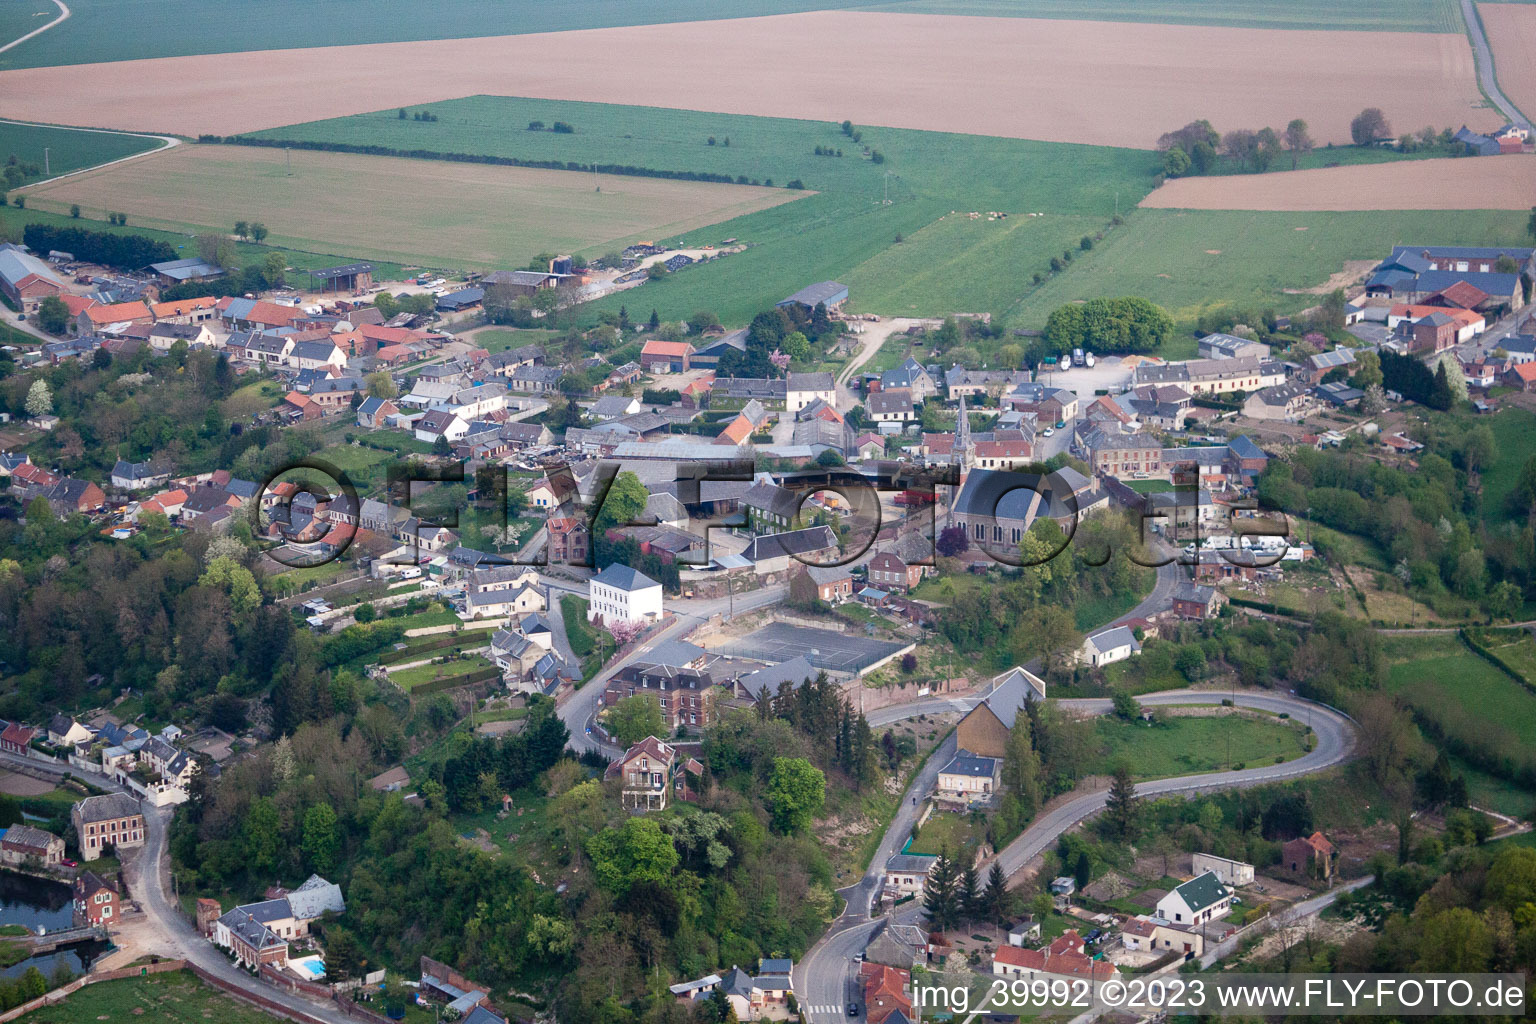 Aerial view of Lesquielles-Saint-Germain in the state Aisne, France